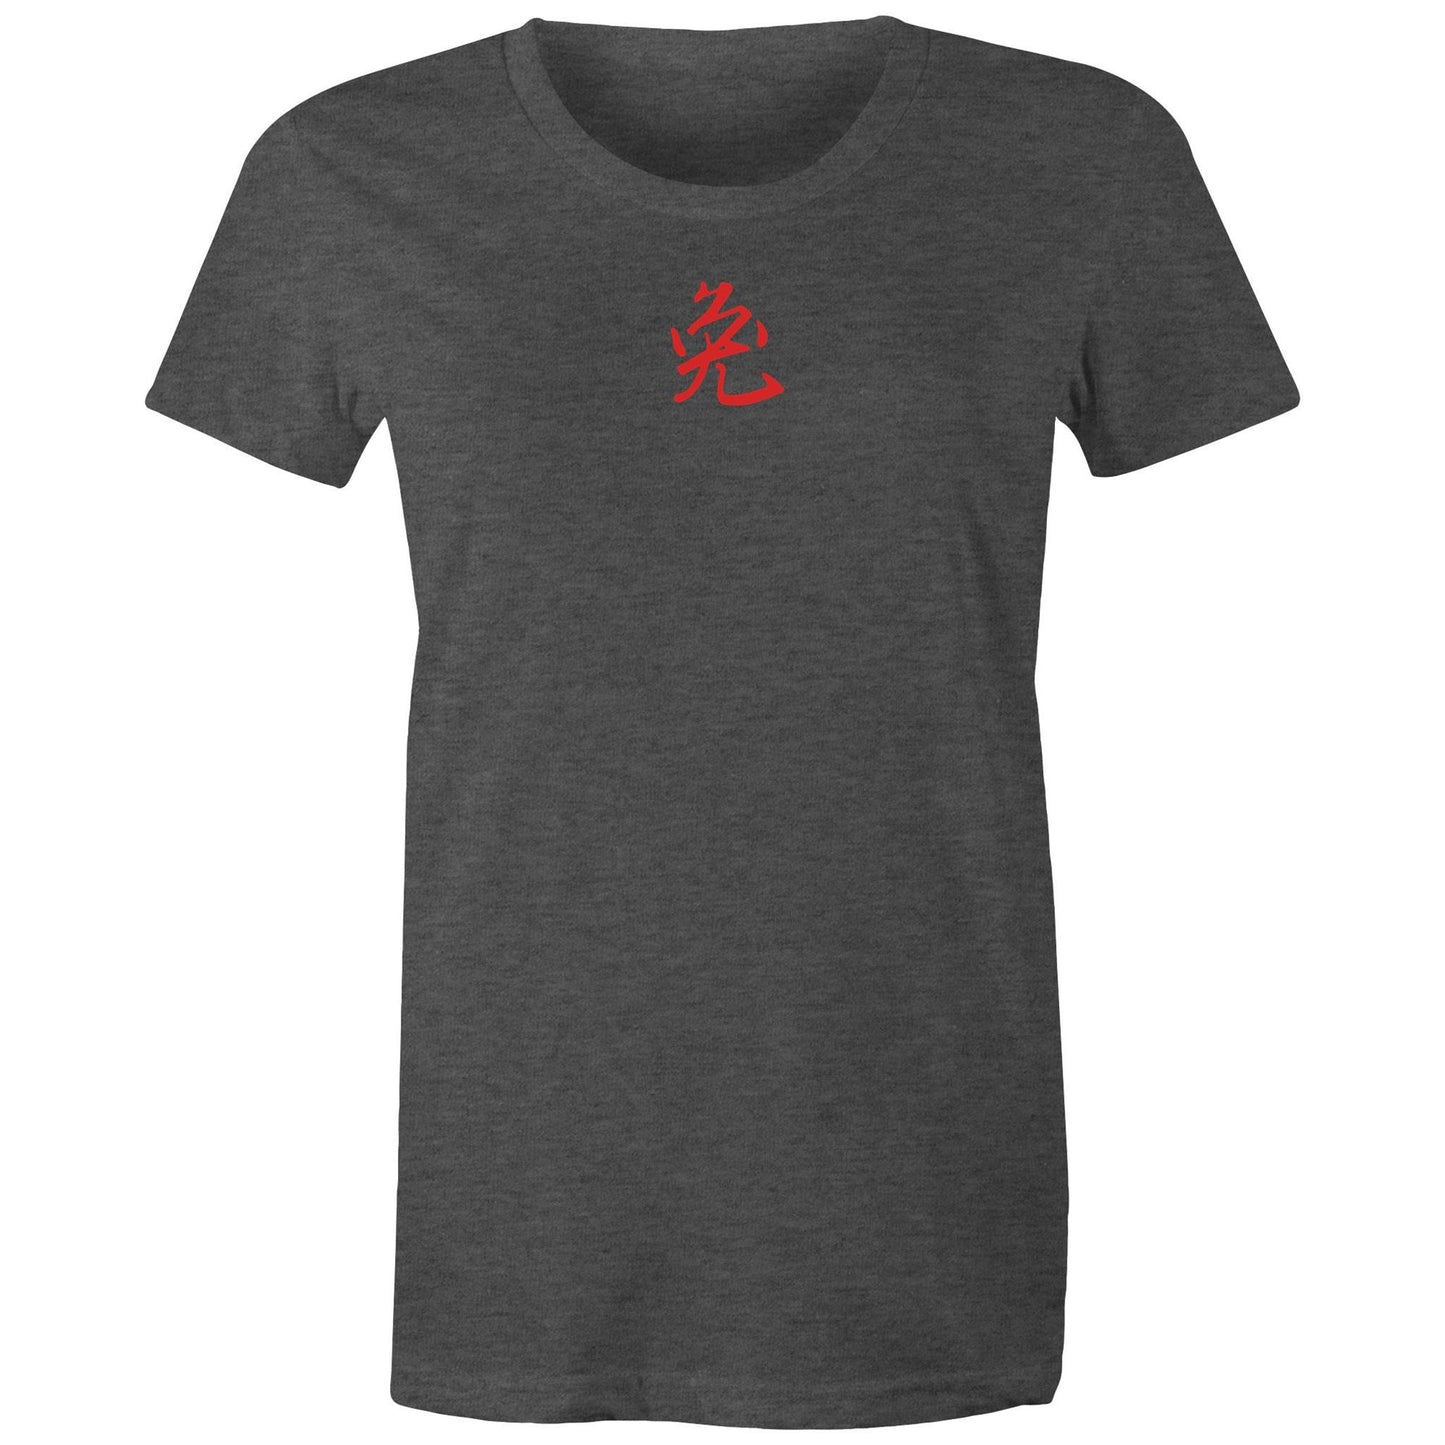 Year of the Rabbit T Shirts for Women